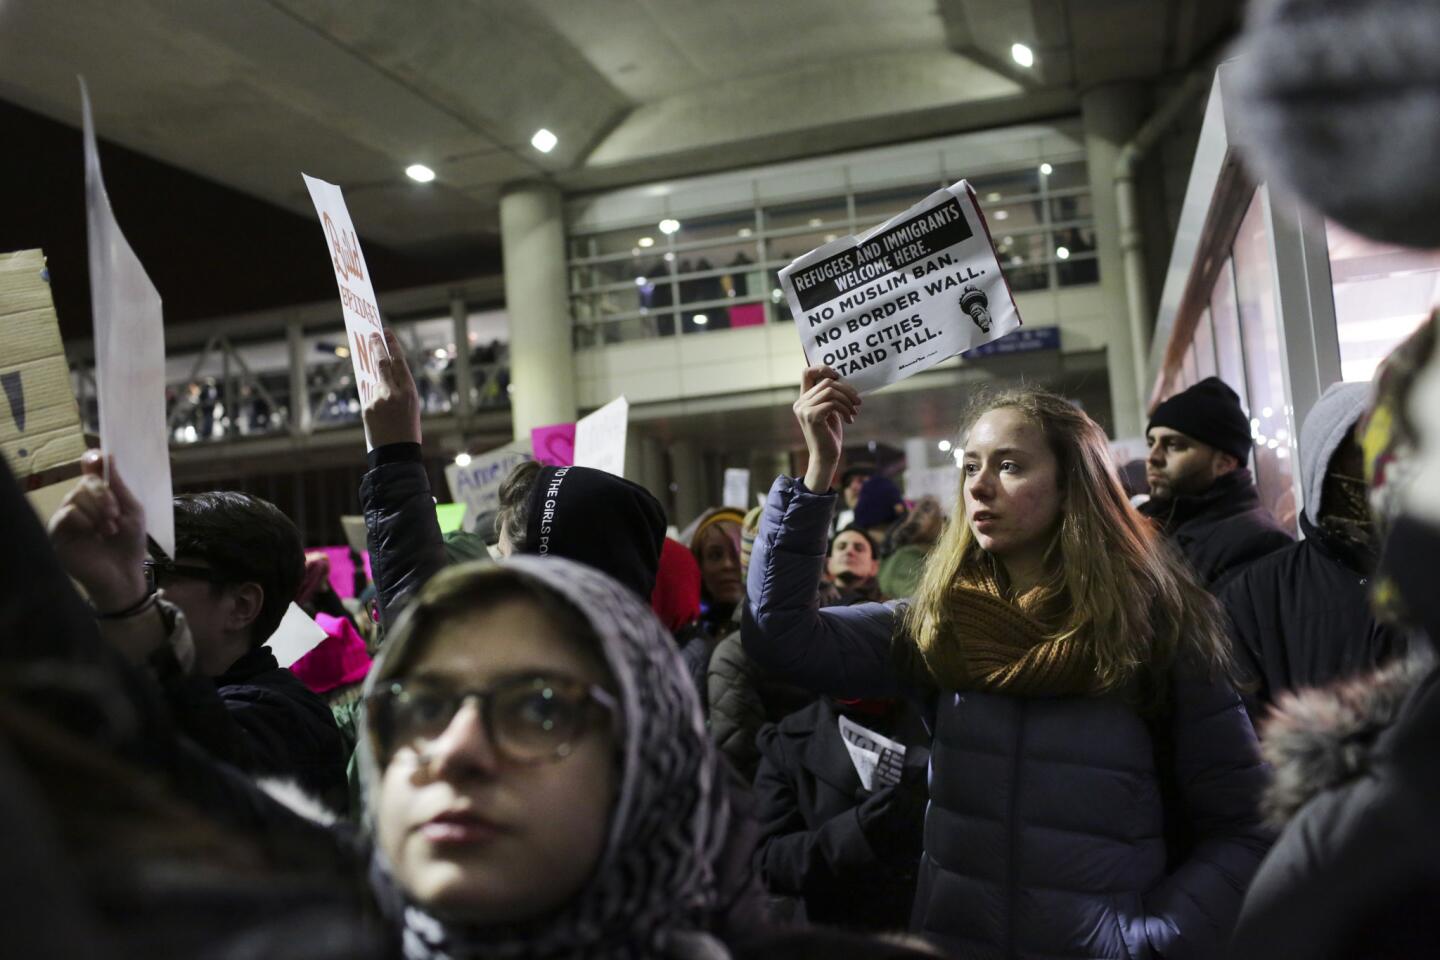 Protest at O'Hare